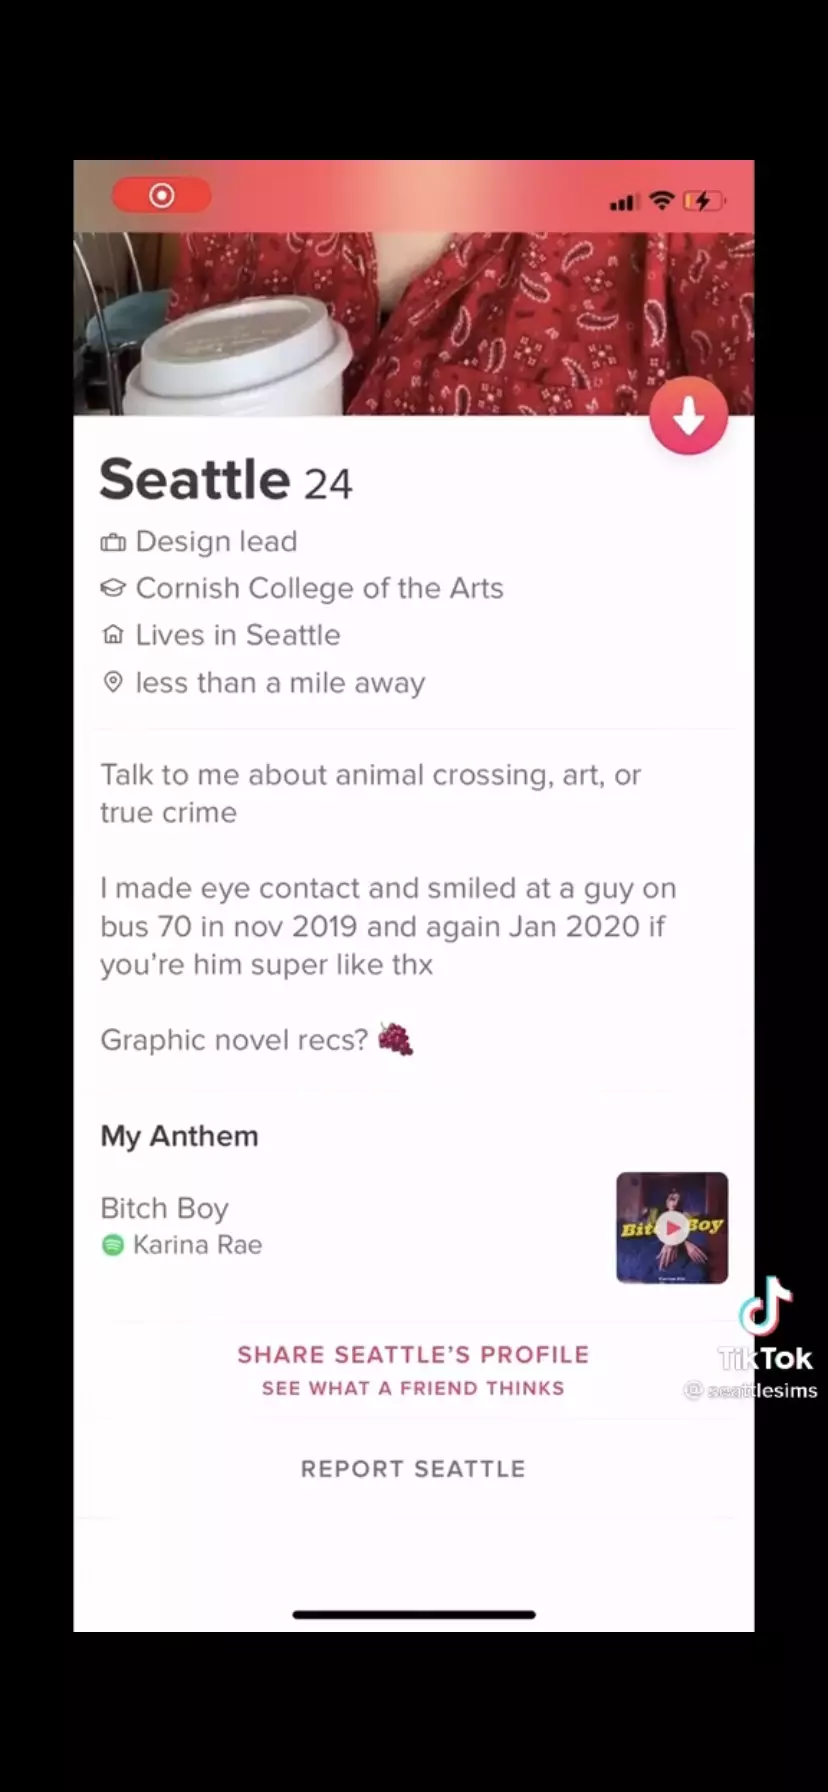 Tinder profile of Seattle Sims who found her bus love 